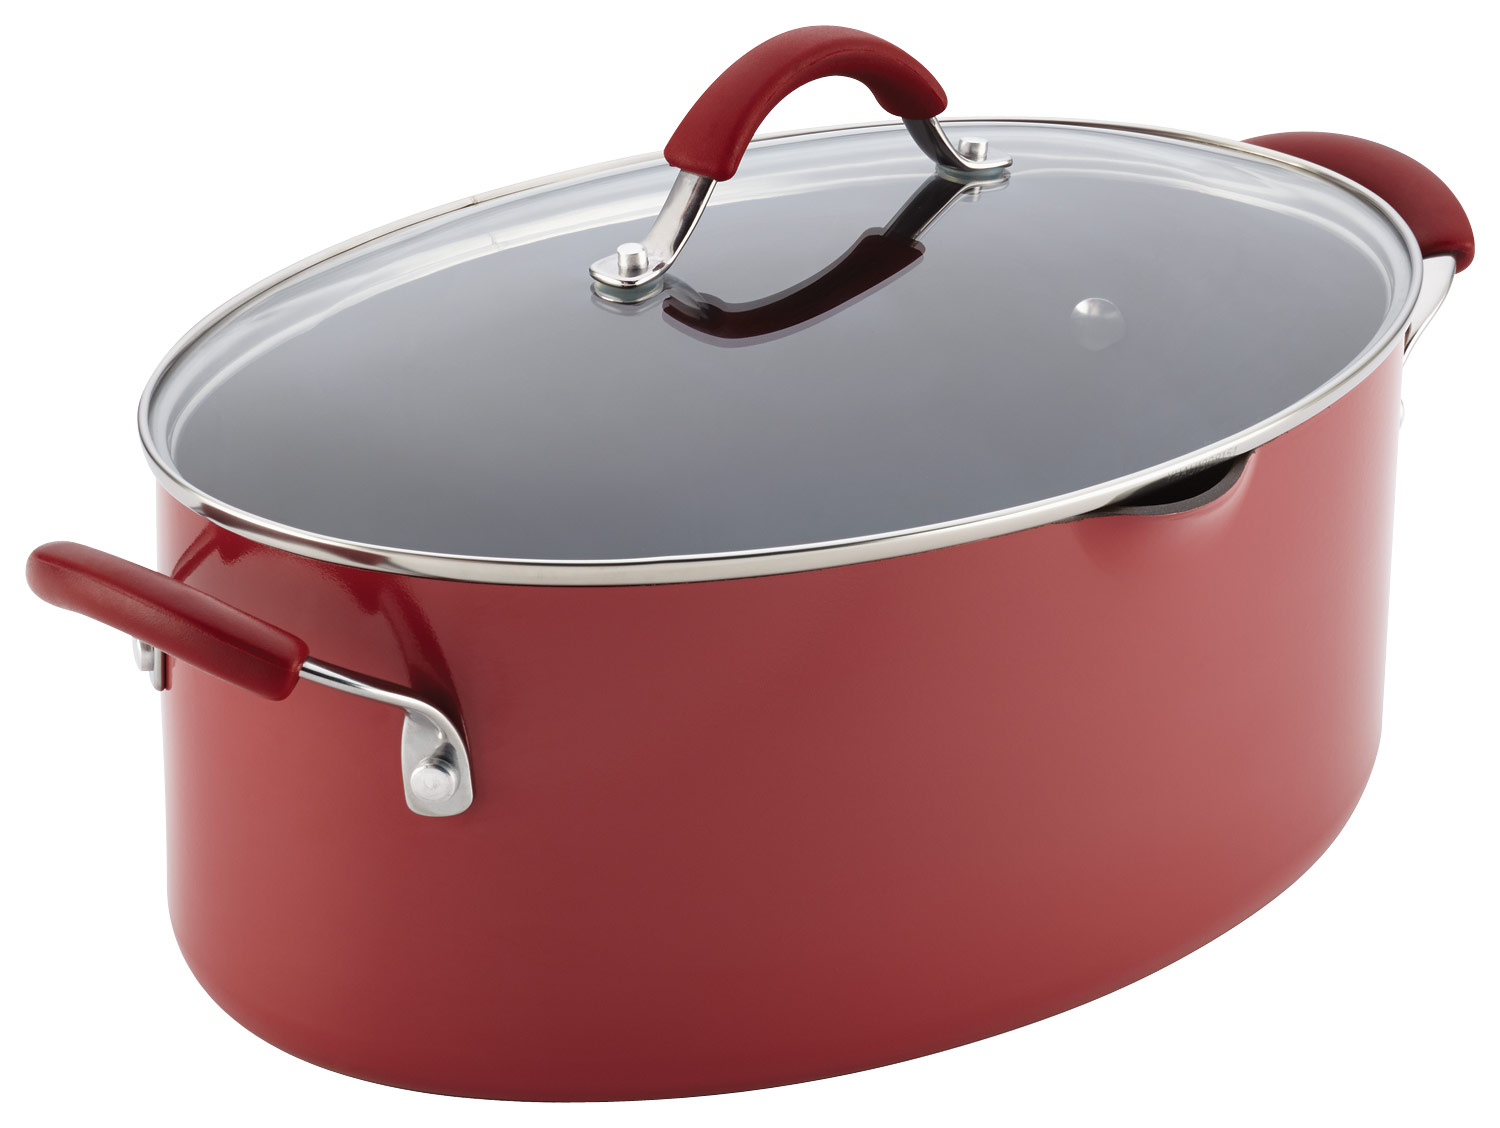 Best Buy: Rachael Ray Create Delicious 9.5-Inch Frying Pan Red